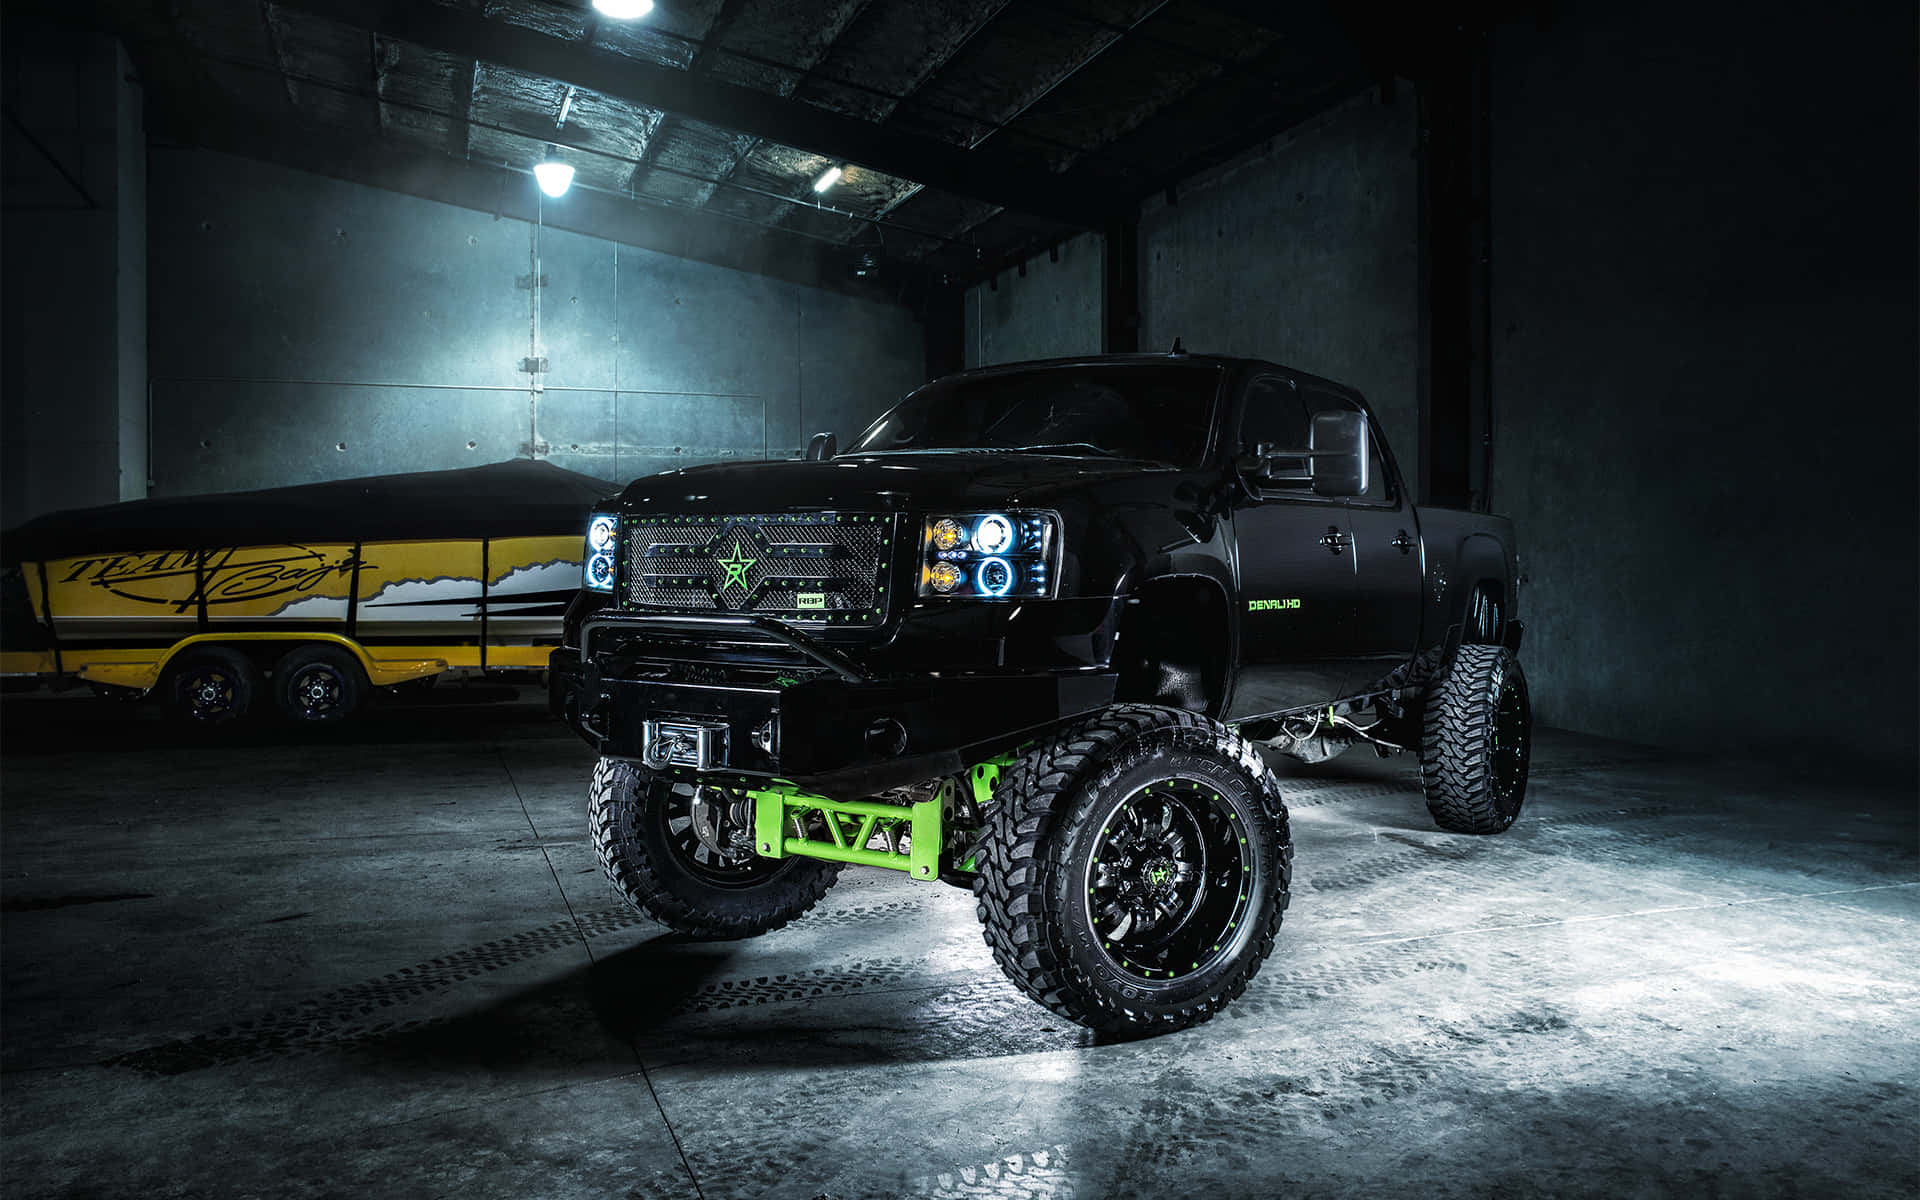 Caption: Majestic Black Lifted Pickup Truck in Action Wallpaper